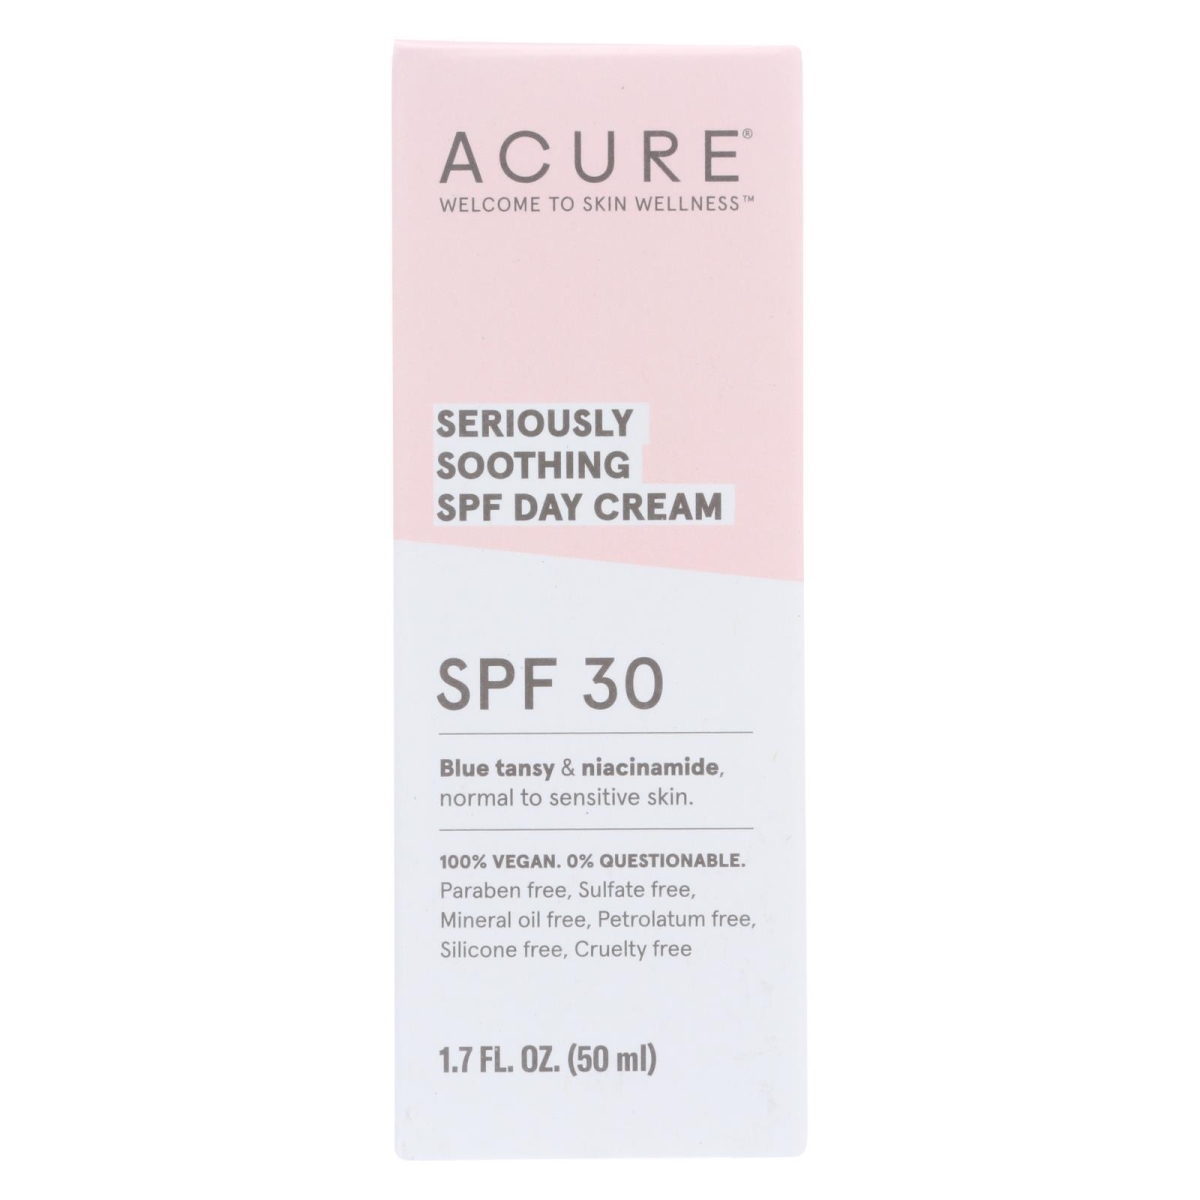 Picture of Acure 2344356 1.7 fl oz SPF 30 Day Cream Seriously Soothing